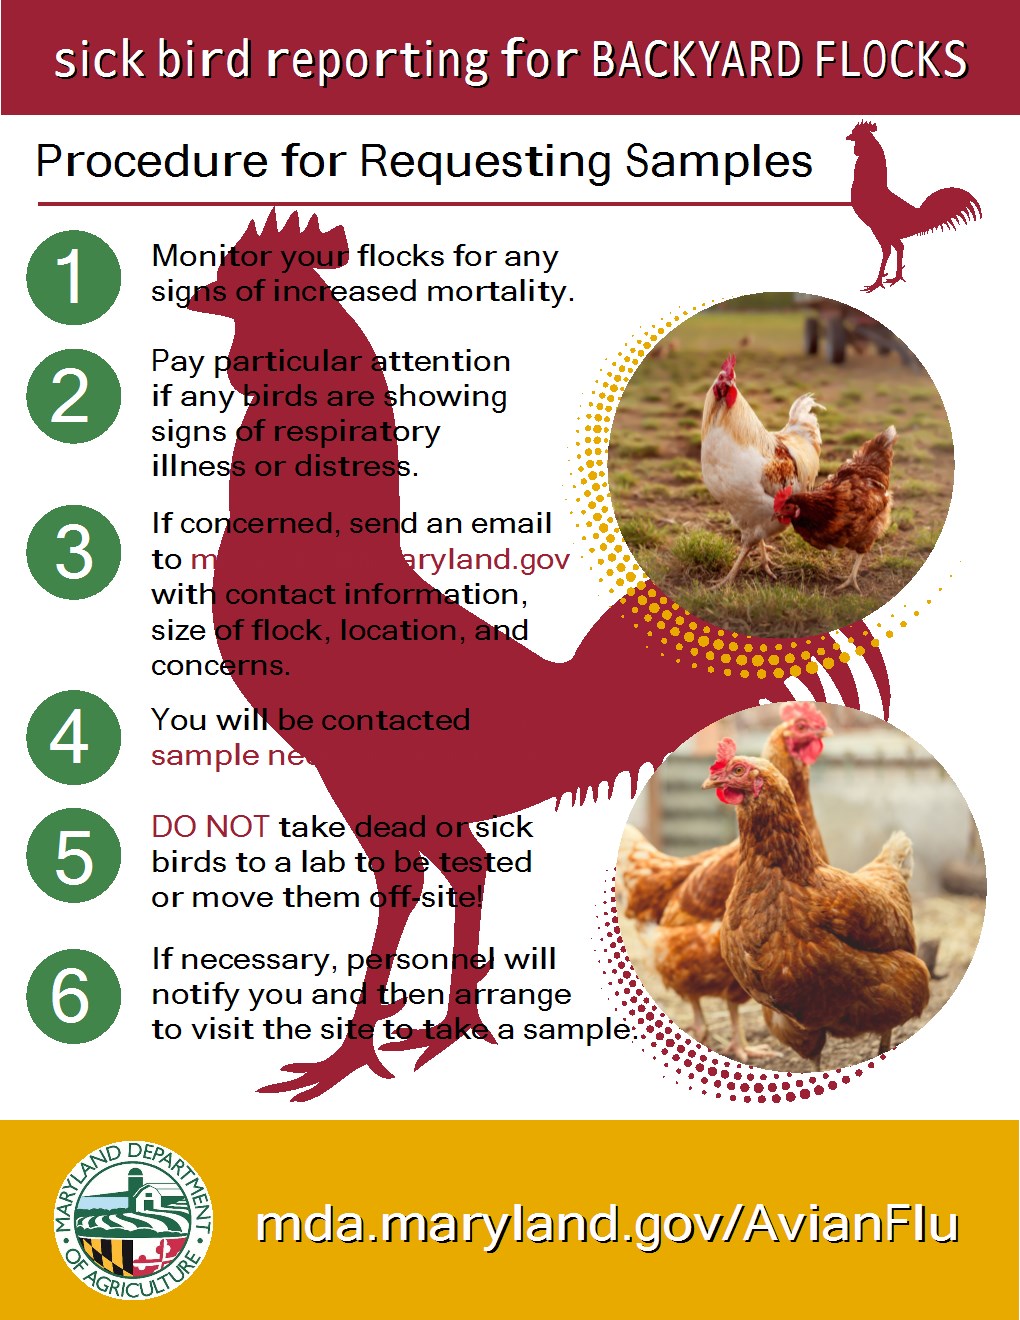 USDA Expands Defend The Flock Campaign With New Resources For All Poultry Growers Cecil County